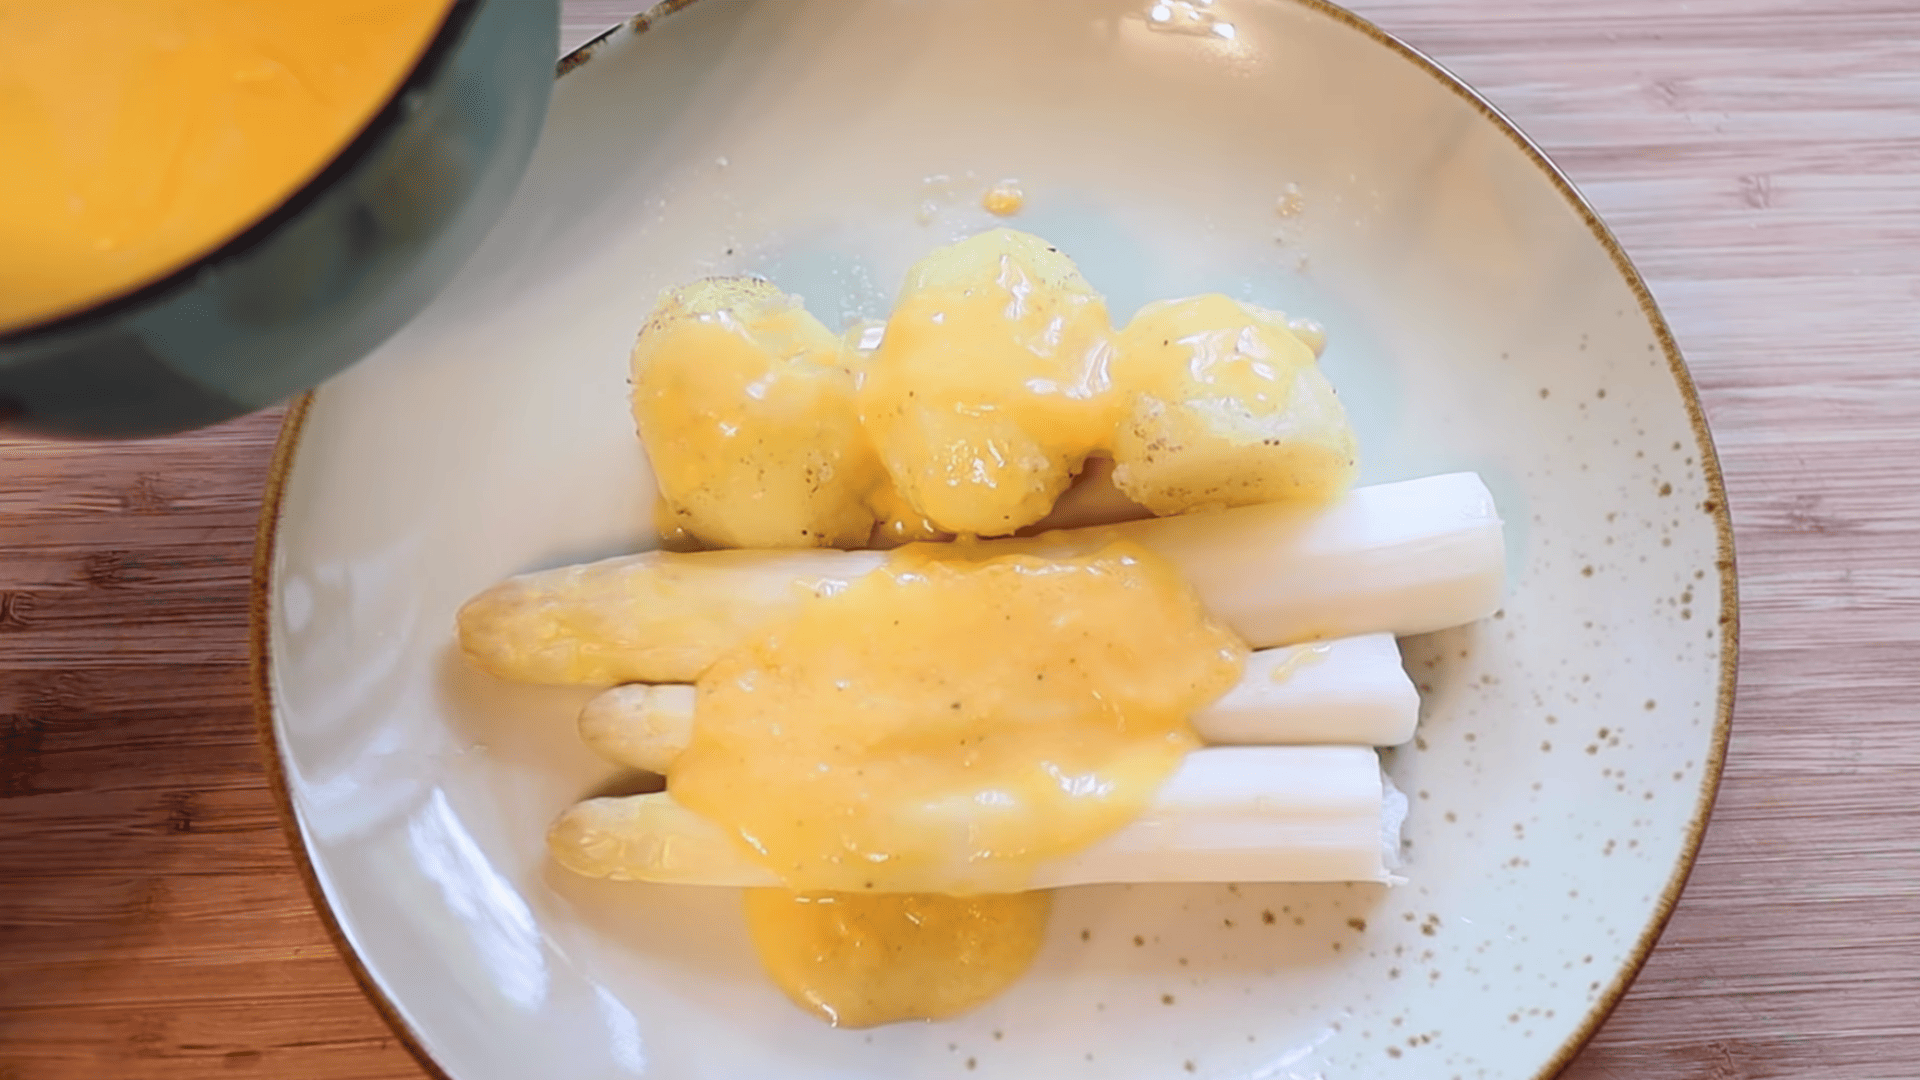 We Made White Asparagus for the First Time at Home | My Merry Messy Life